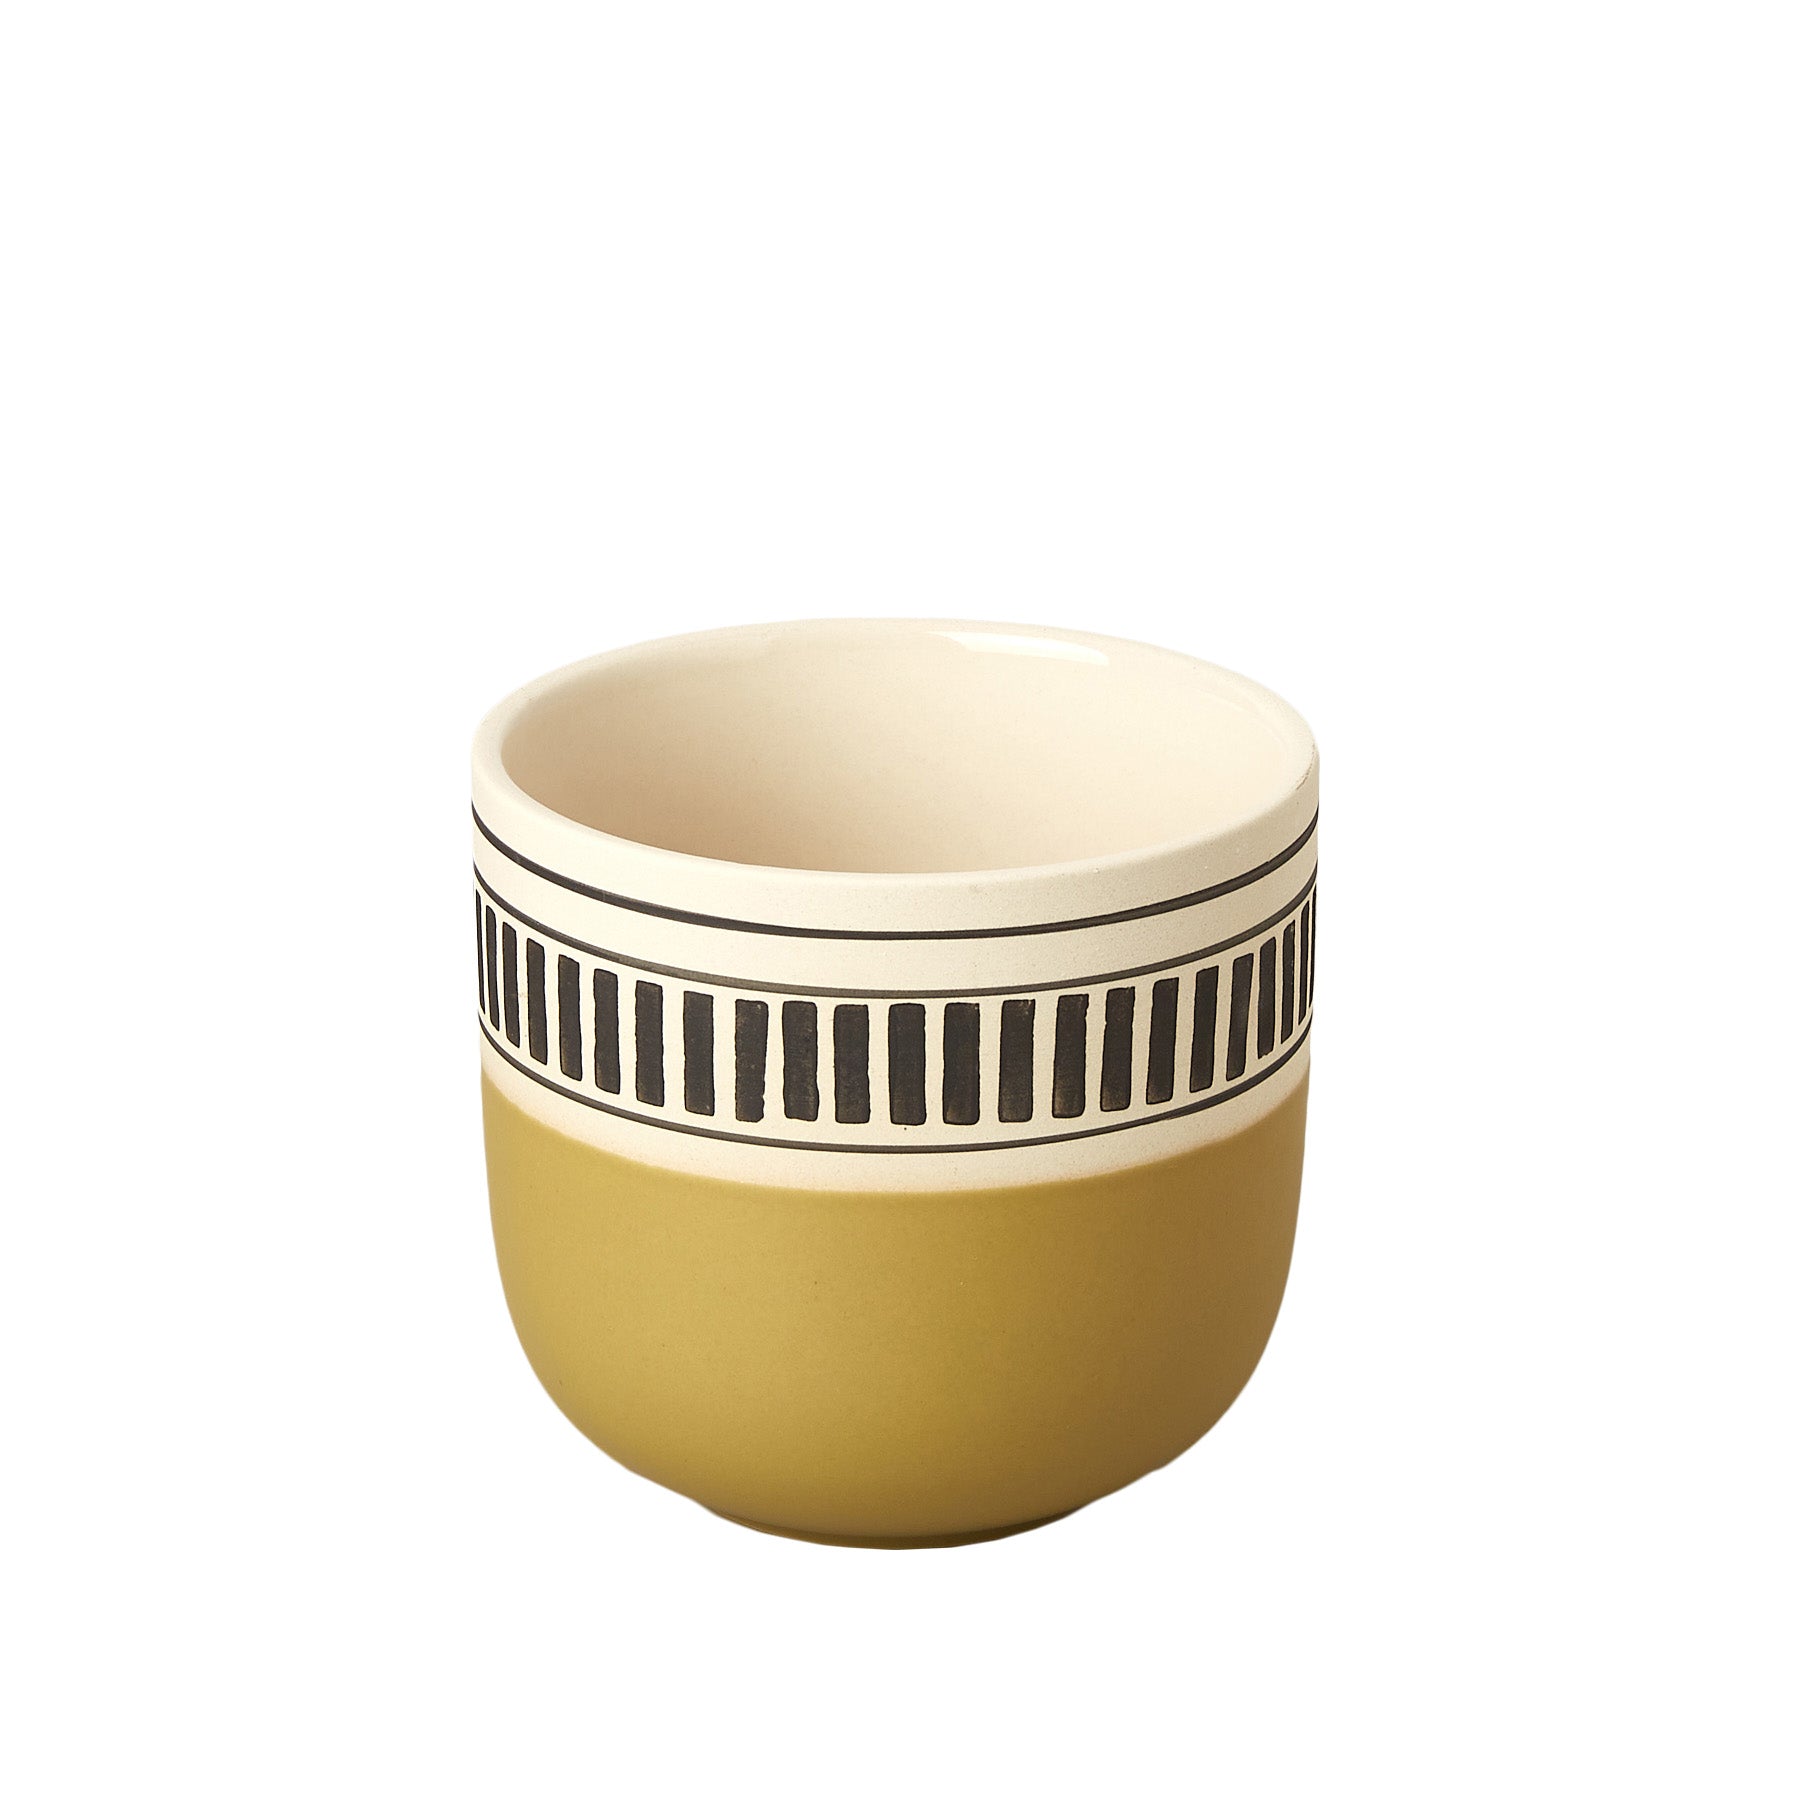 A yellow cup with black and white stripes on it that would make a perfect addition to the best garden nursery near me.